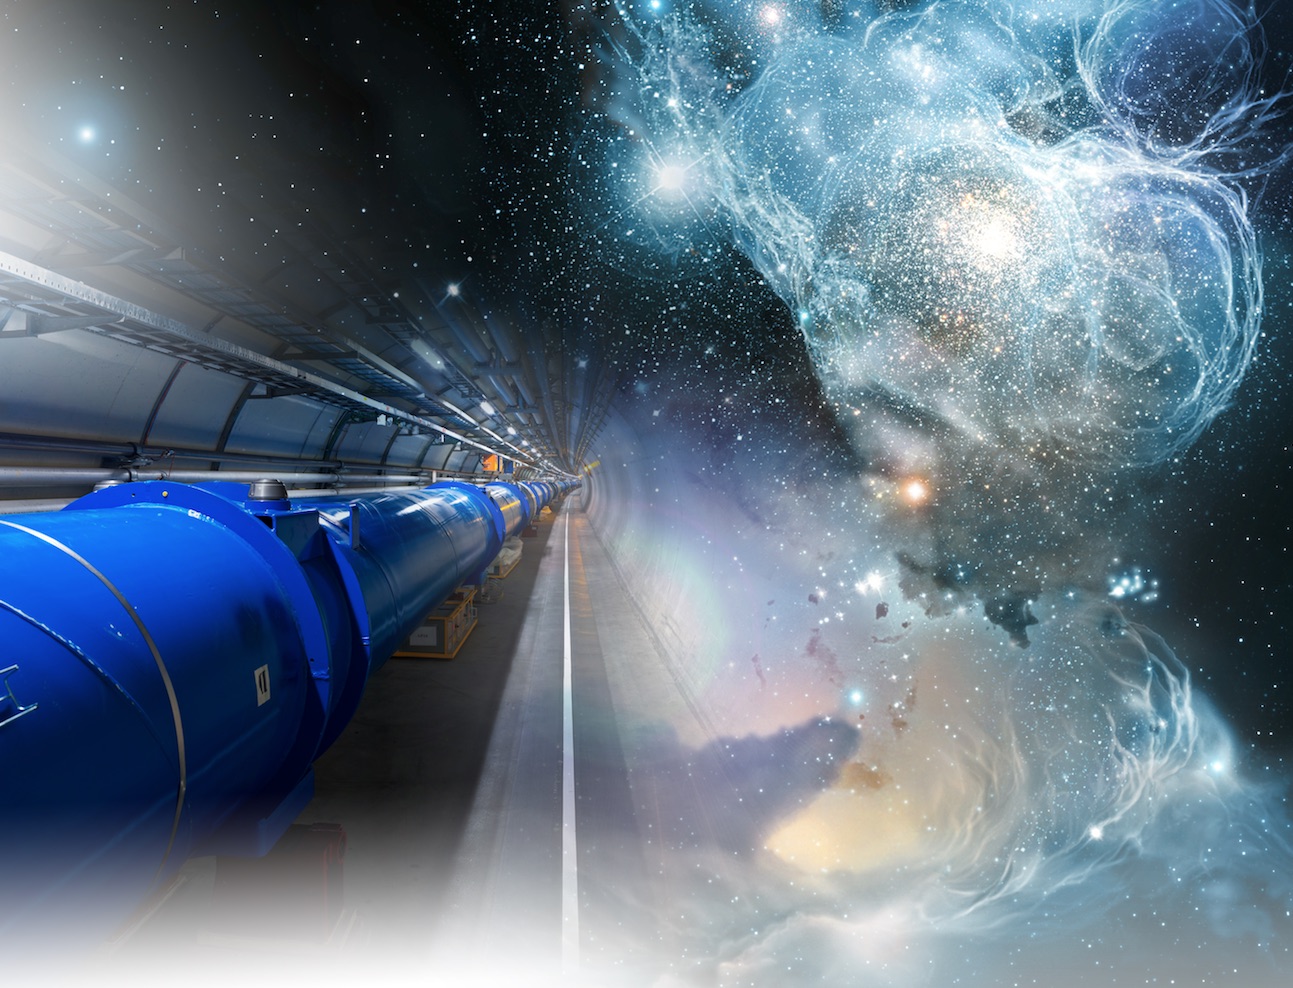 Photo montage with a LHC image and a picture of the space